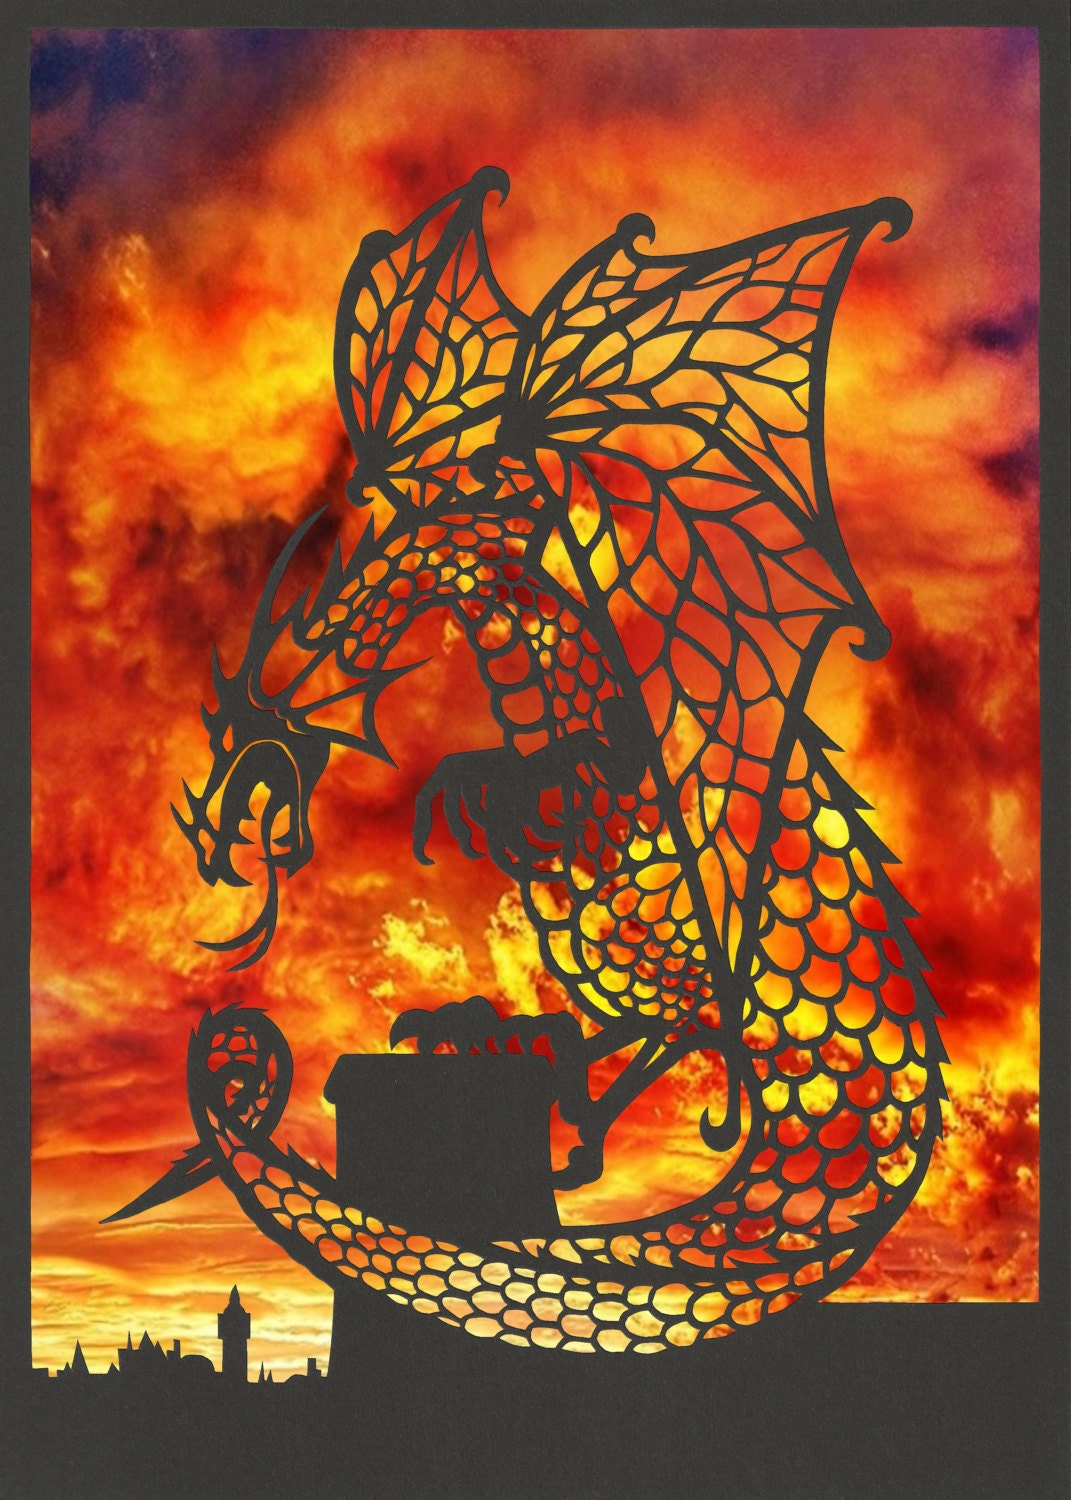 Greeting Card x 4: Fantasy Dragon, A5 size. High quality print of OOAK handmade, hand painted paper cut from original 3D drawing or artwork. - NineFingerJo